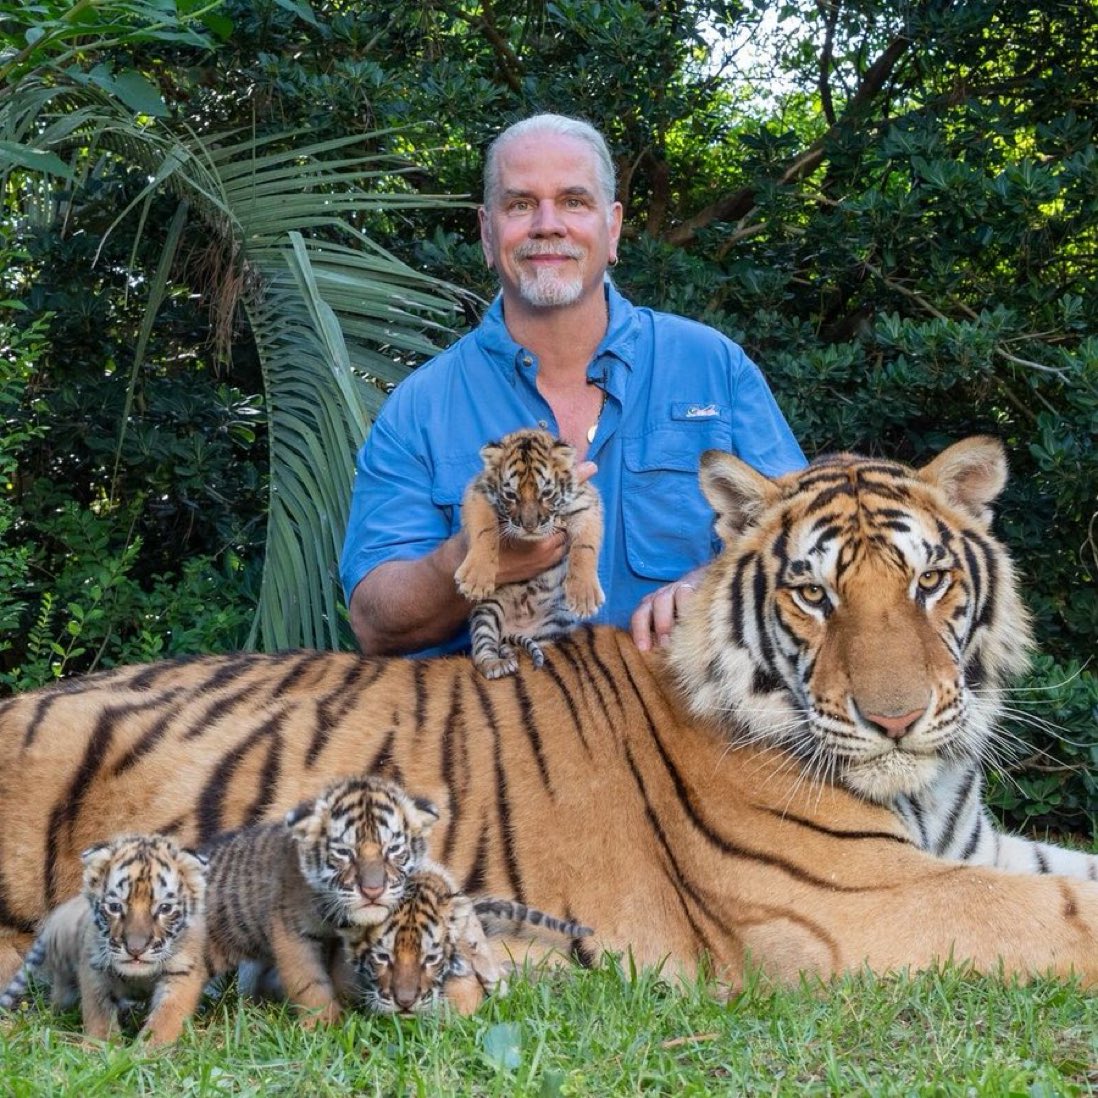 Bhagavan “Doc” Antle who starred in “Tiger King” reportedly pleaded guilty to wildlife trafficking and money laundering